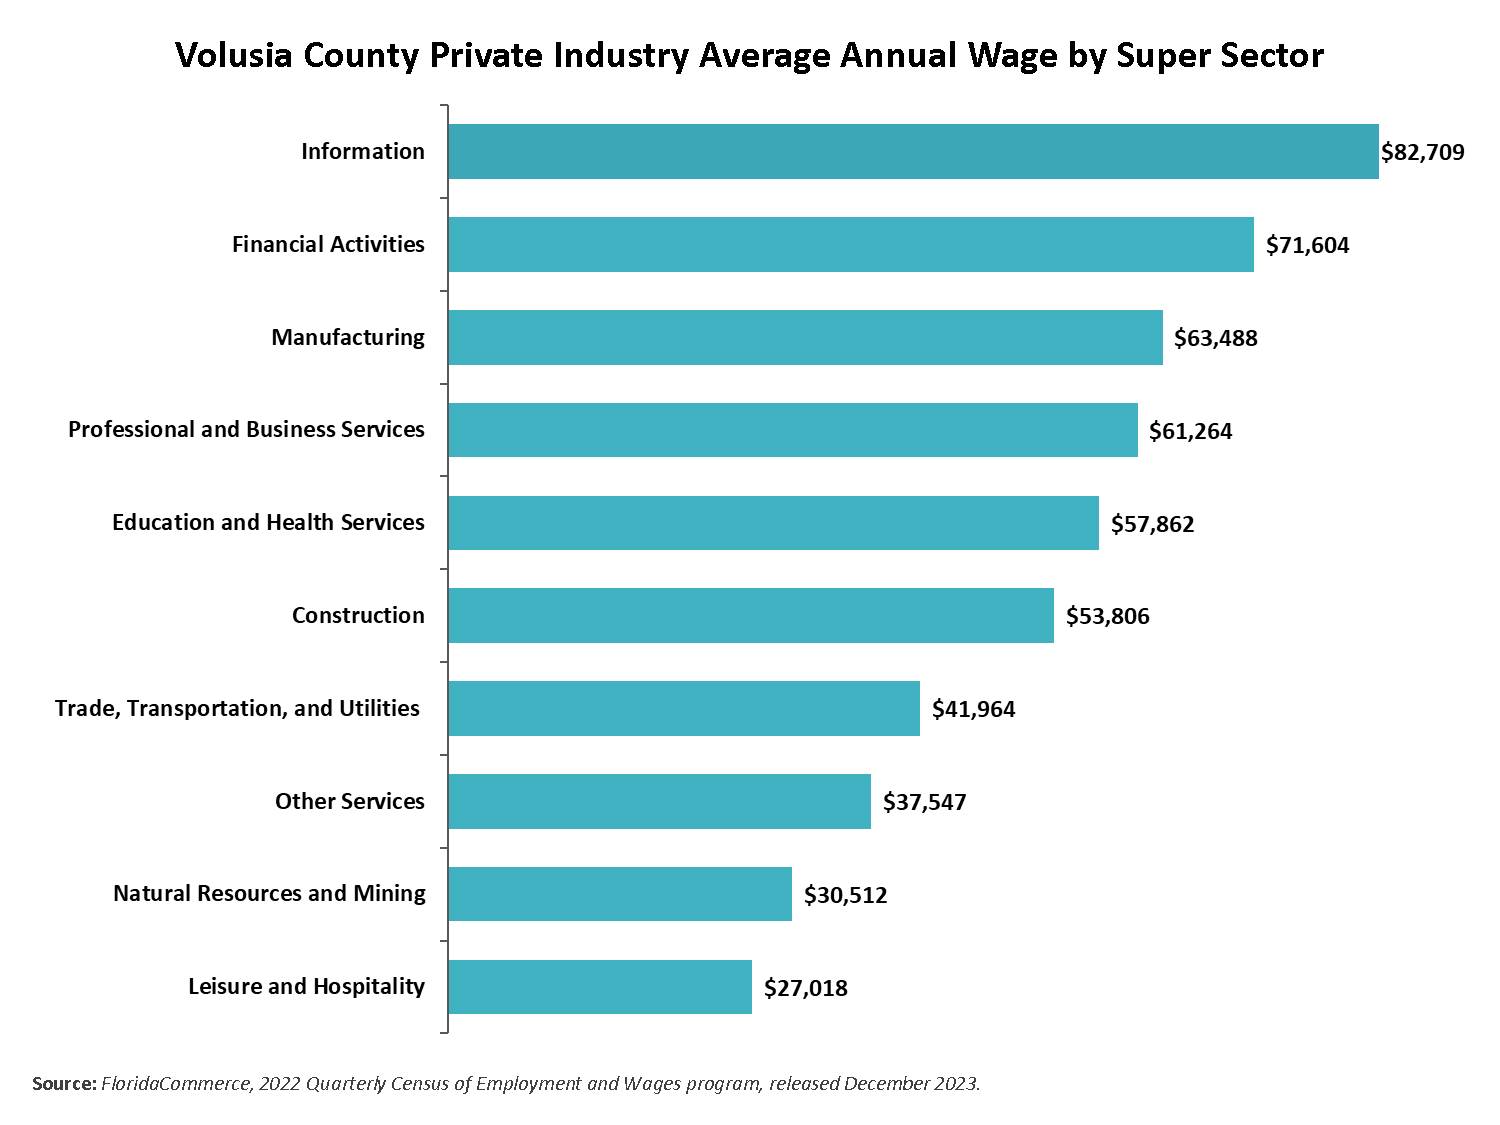 The chart shows the 2021 Volusia County Private Industry Average Annual Wage by Super Sector. The highest average wage was in the Information sector at $72,270. Financial Activities $67,406. Manufacturing $59,891. Professional and Business Services $57,035. Education and Health Services $55,077. Unclassified $54,705. Construction $50,004. Trade, Transportation, and Utilities $39,423. Other Services $36,295. Natural Resources and Mining $27,663. Leisure and Hospitality had the lowest average wage of $25,384.